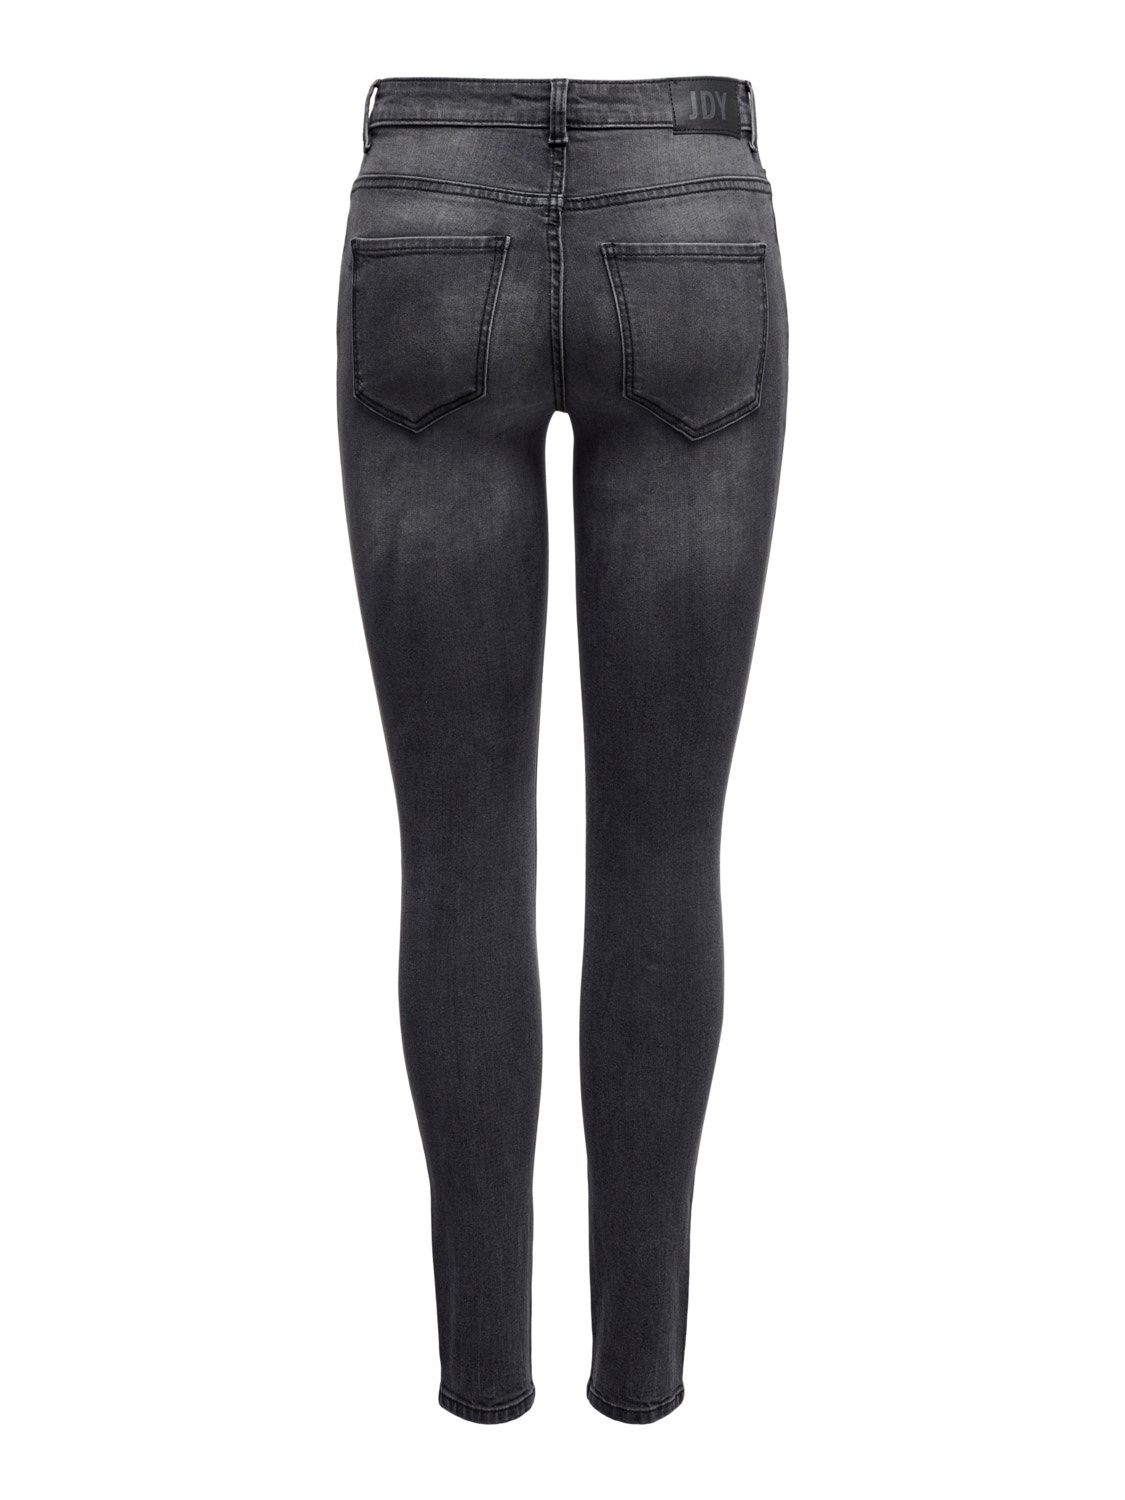 ONLY Skinny Fit Mittlere Taille Jeans -Black Denim - 15267521